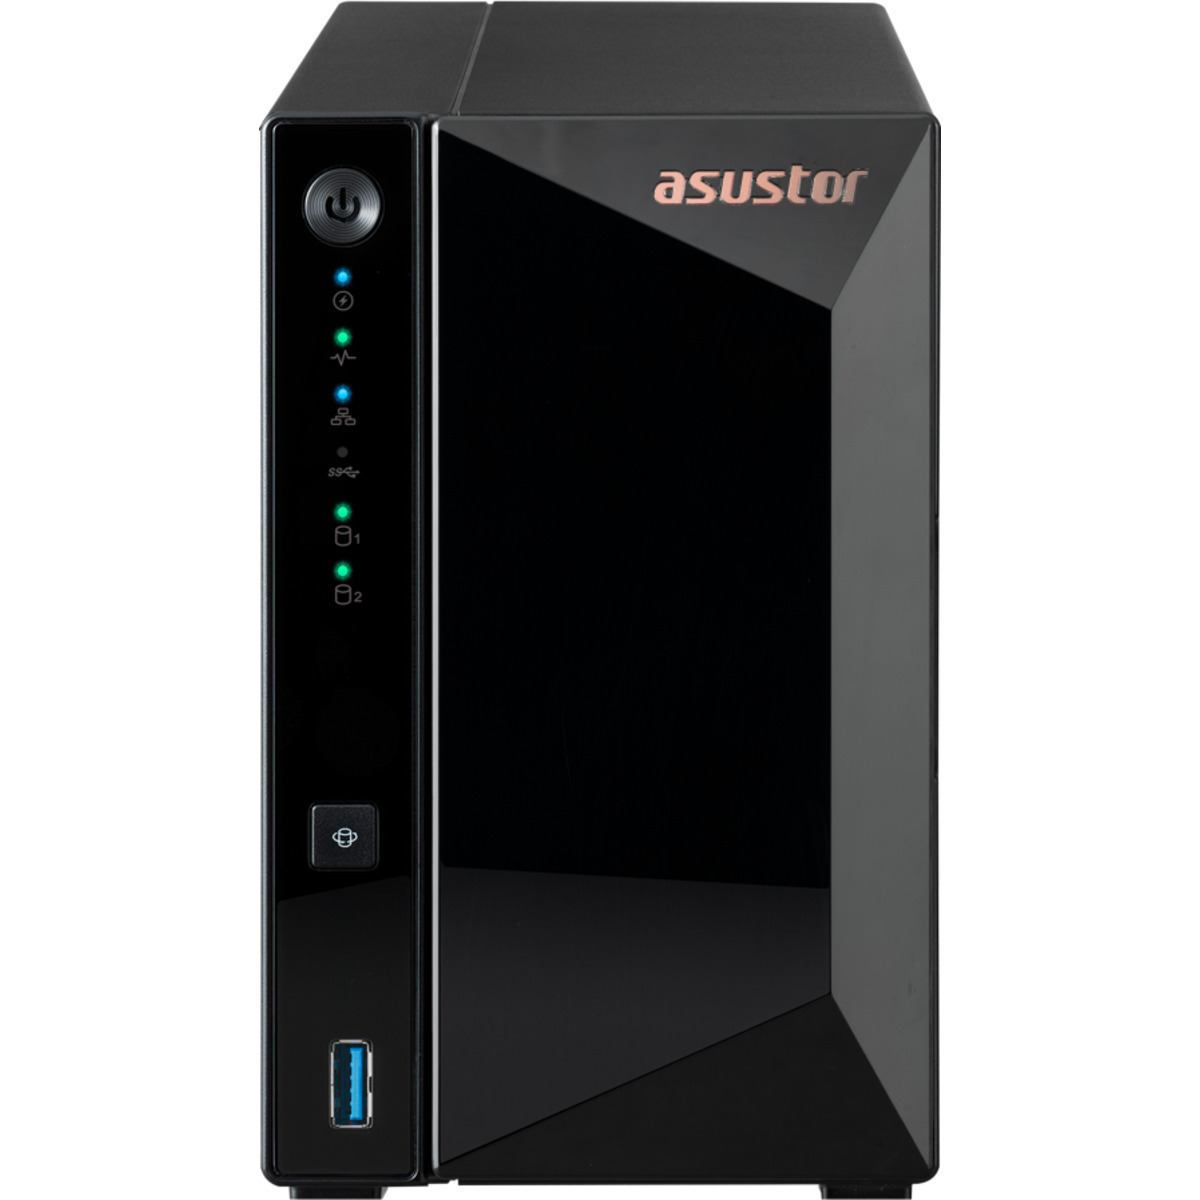 ASUSTOR DRIVESTOR 2 Pro Gen2 AS3302T v2 8tb 2-Bay Desktop Personal / Basic Home / Small Office NAS - Network Attached Storage Device 2x4tb Toshiba MN Series MN08ADA400E 3.5 7200rpm SATA 6Gb/s HDD NAS Class Drives Installed - Burn-In Tested - ON SALE DRIVESTOR 2 Pro Gen2 AS3302T v2